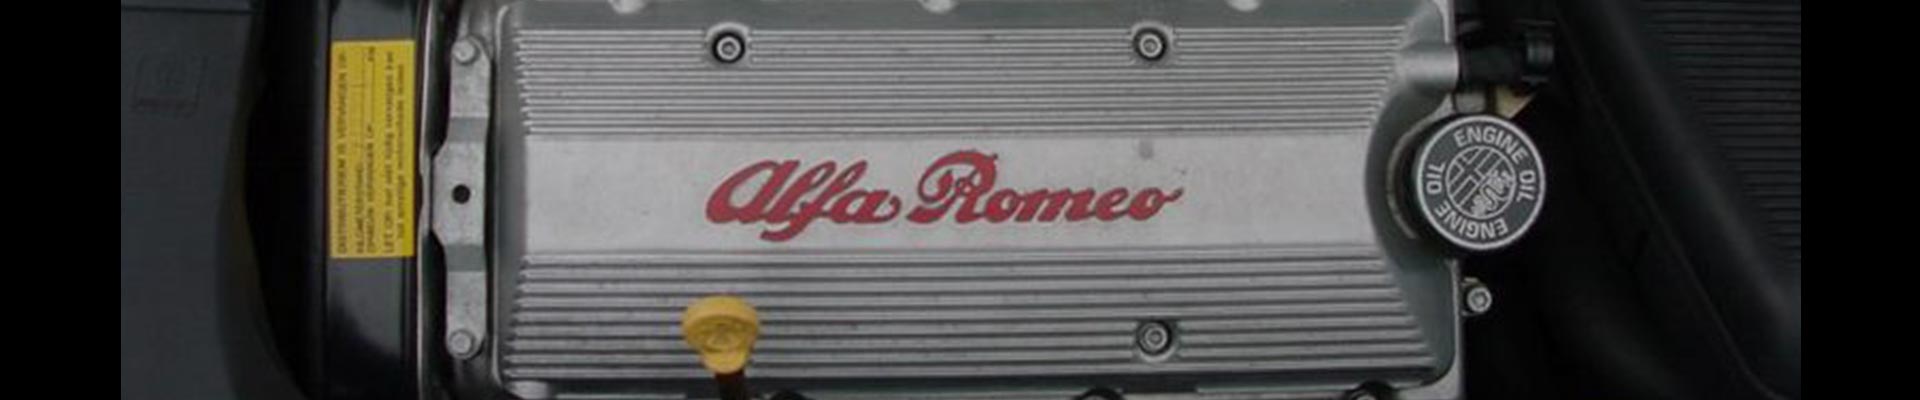 Shop Replacement 1986 Alfa Romeo GTV-6 Parts with Discounted Price on the Net